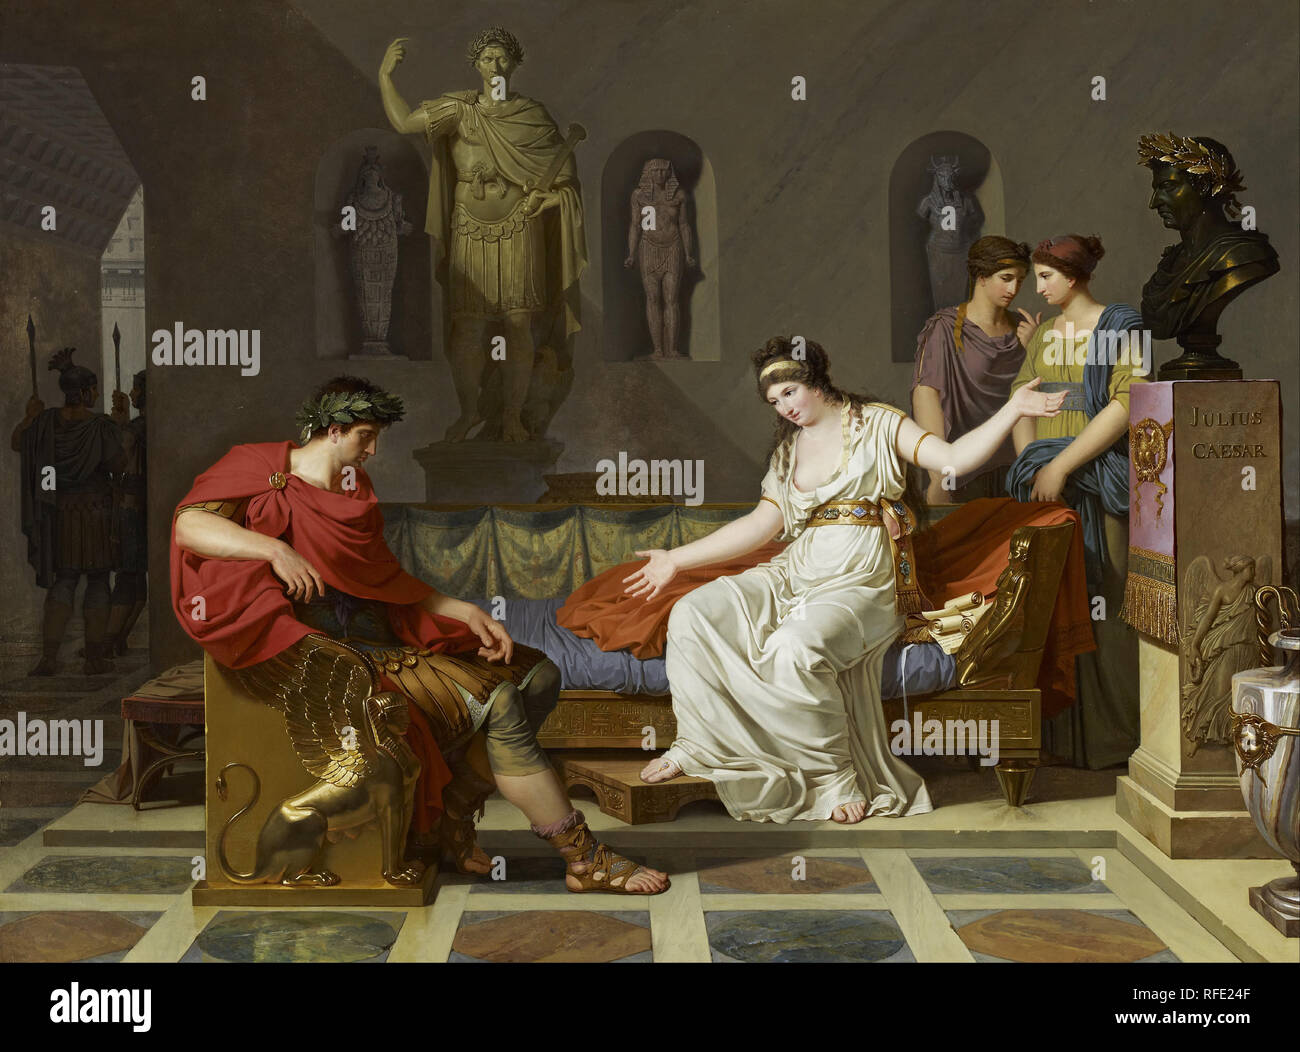 Cleopatra and Octavian. Date/Period: 1787. Painting. Oil on canvas. Height: 838 mm (32.99 in); Width: 1,125 mm (44.29 in). Author: LOUIS GAUFFIER. Stock Photo